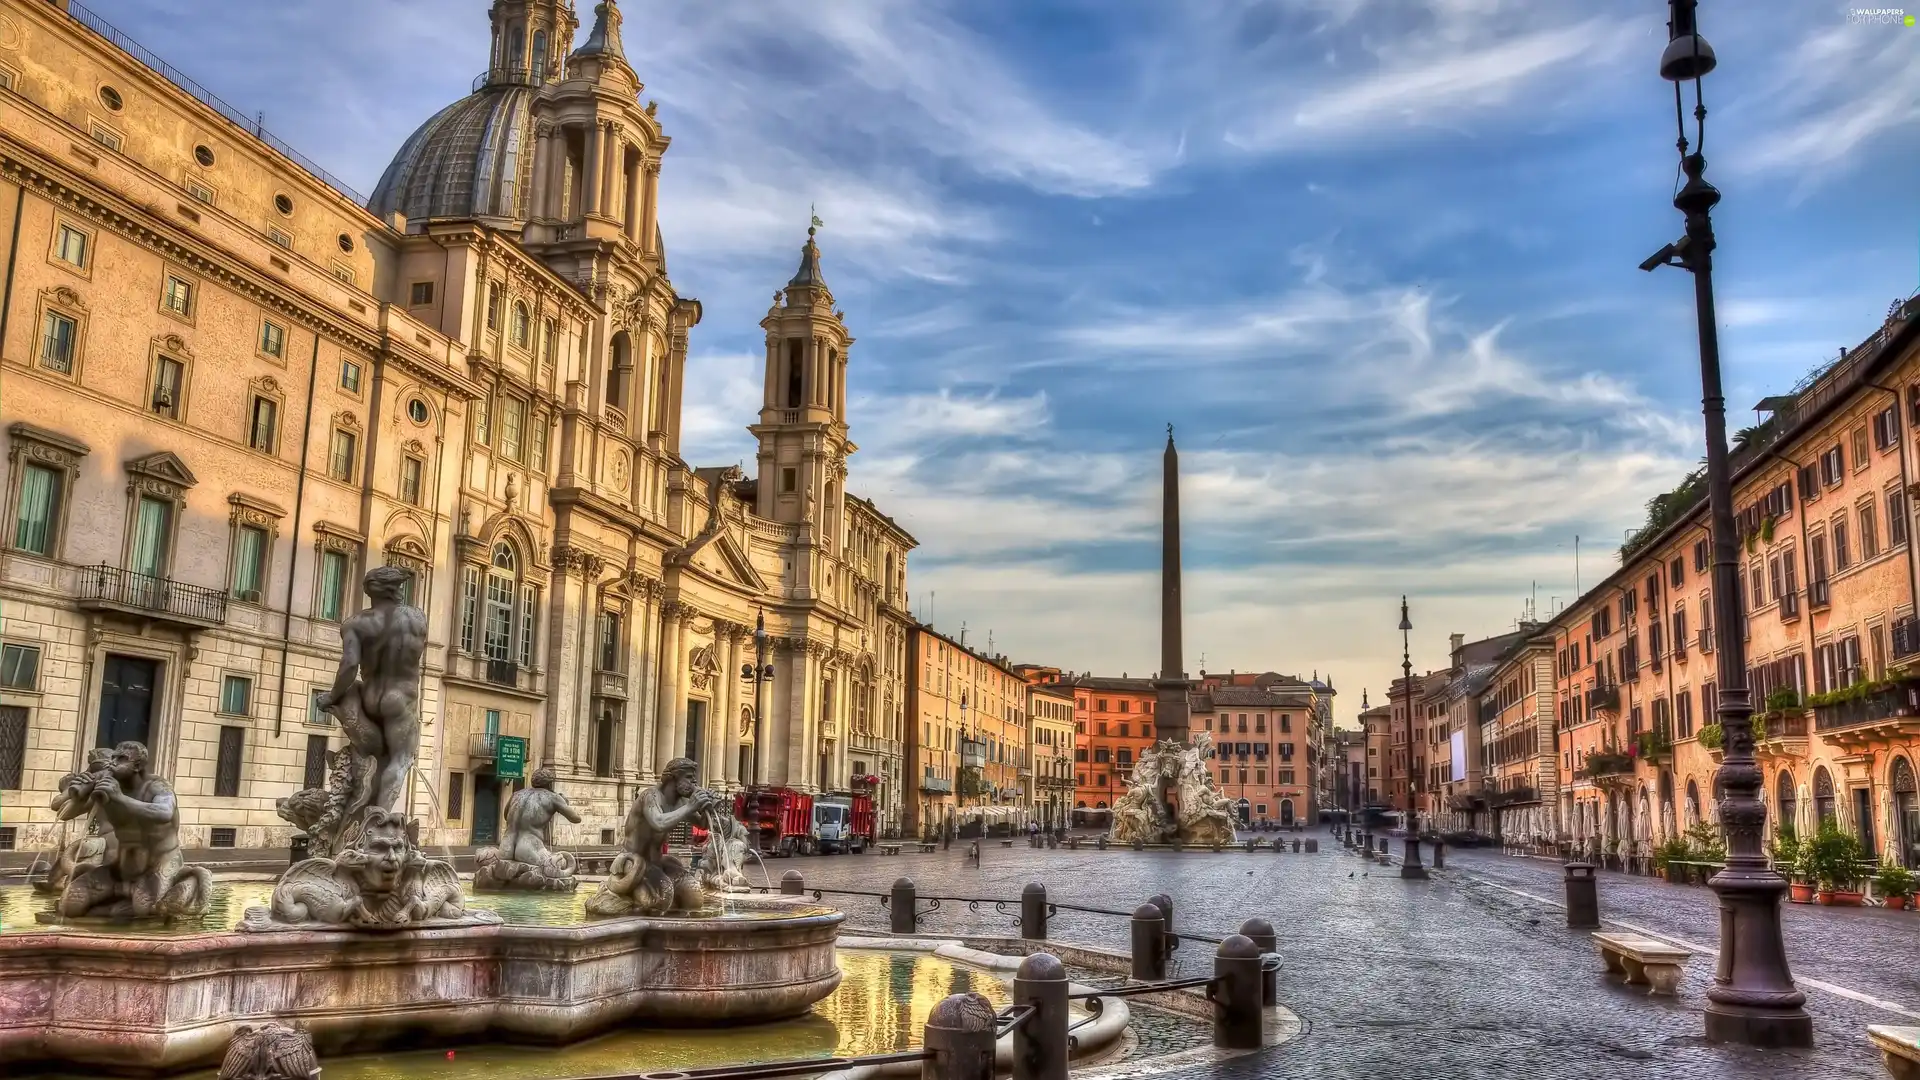 Navona Square, Italy, fountain, Monument, buildings, Rome